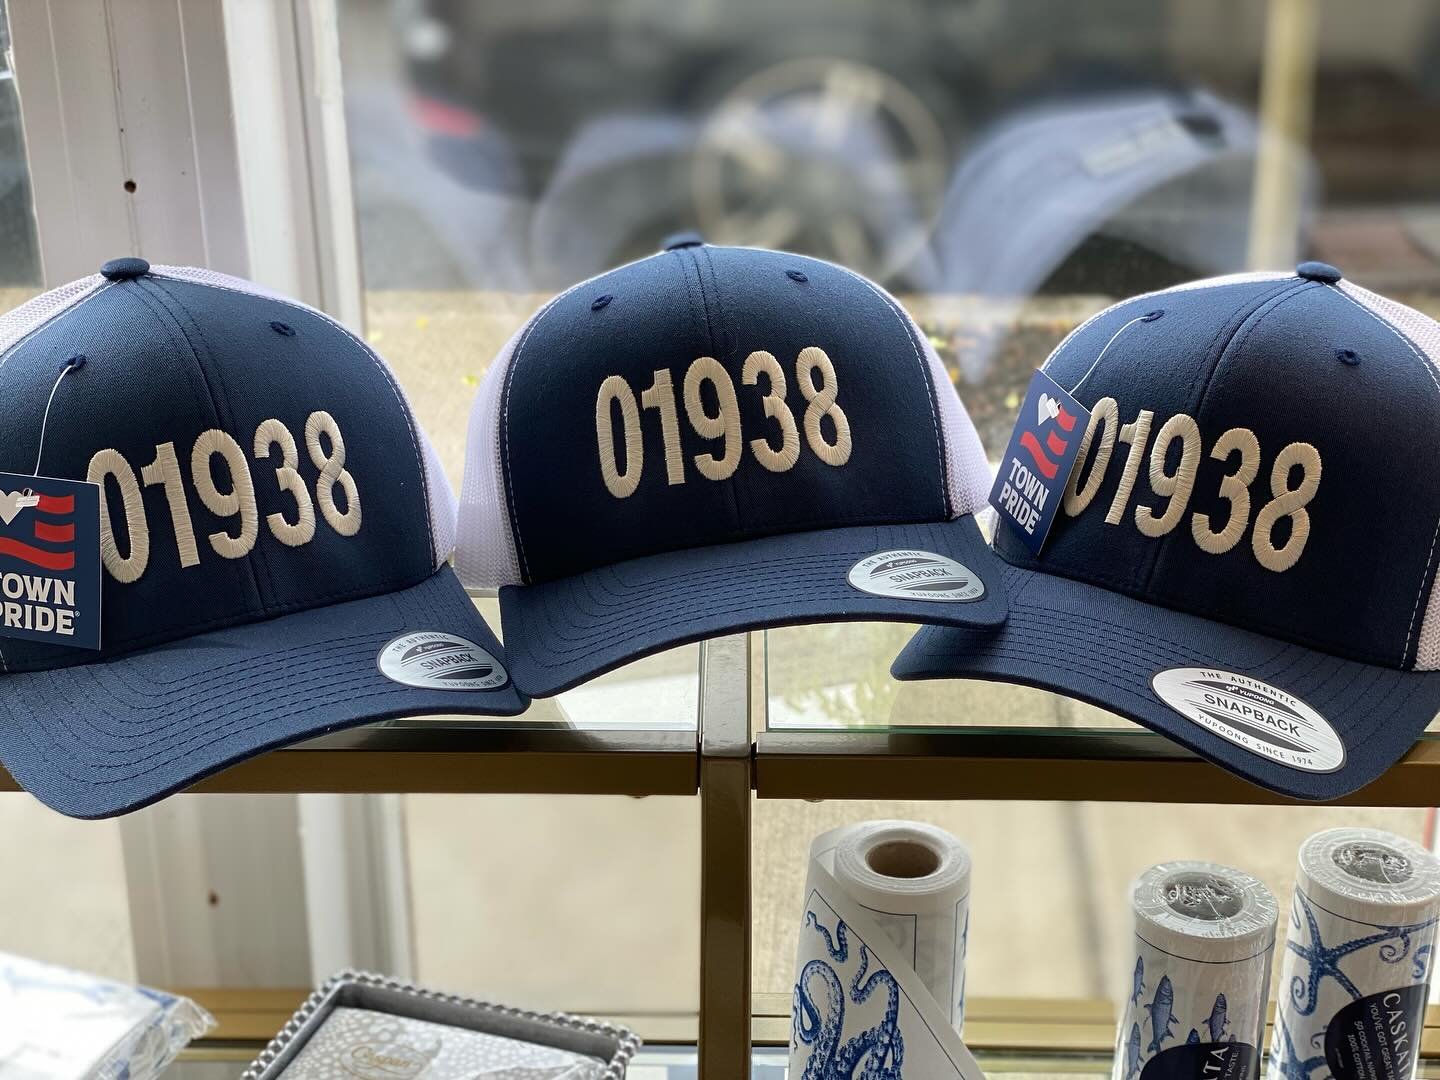 BACK IN BY POPULAR DEMAND‼️ The Ipswich Zip Code Hat! 🧢 Perfect gift for the Ipswich Grads or Dads! Or show your town pride 🇺🇸 for Ipswich at the upcoming Ipswich Parade and Block Party in town on June 8th! 🎉 Purchase at the shop or in LINK IN BI